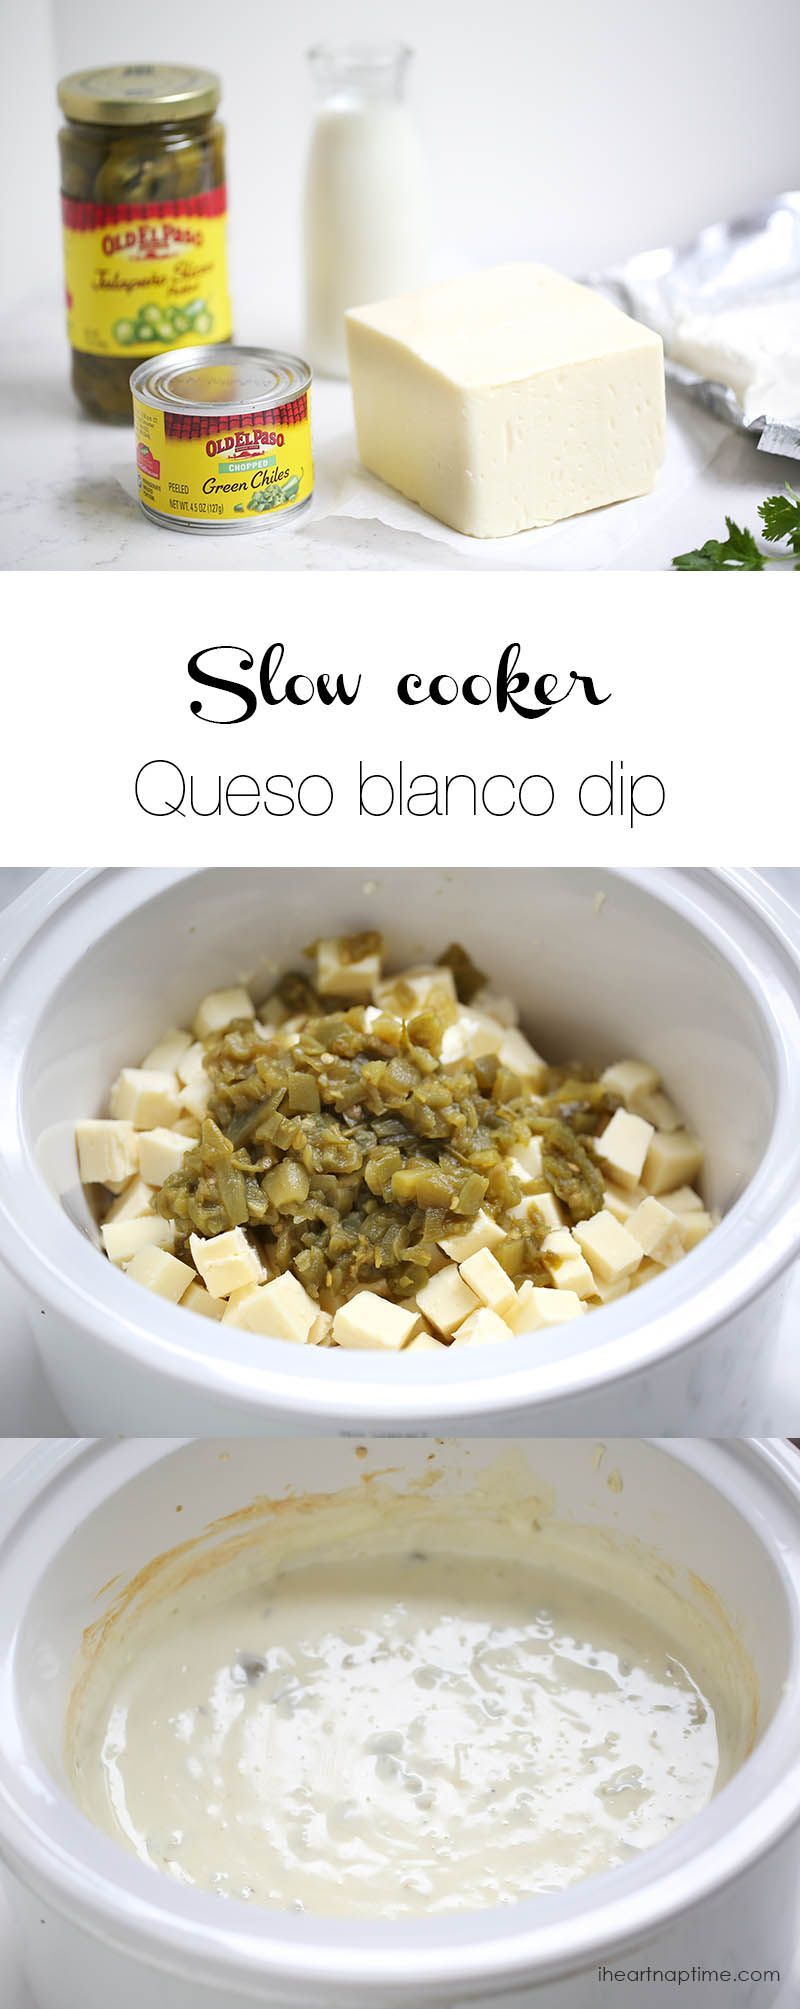 Slow cooker queso blanco dip -5 minutes to prep and only 5 ingredients to make! This cheese dip is seriously the best ever!